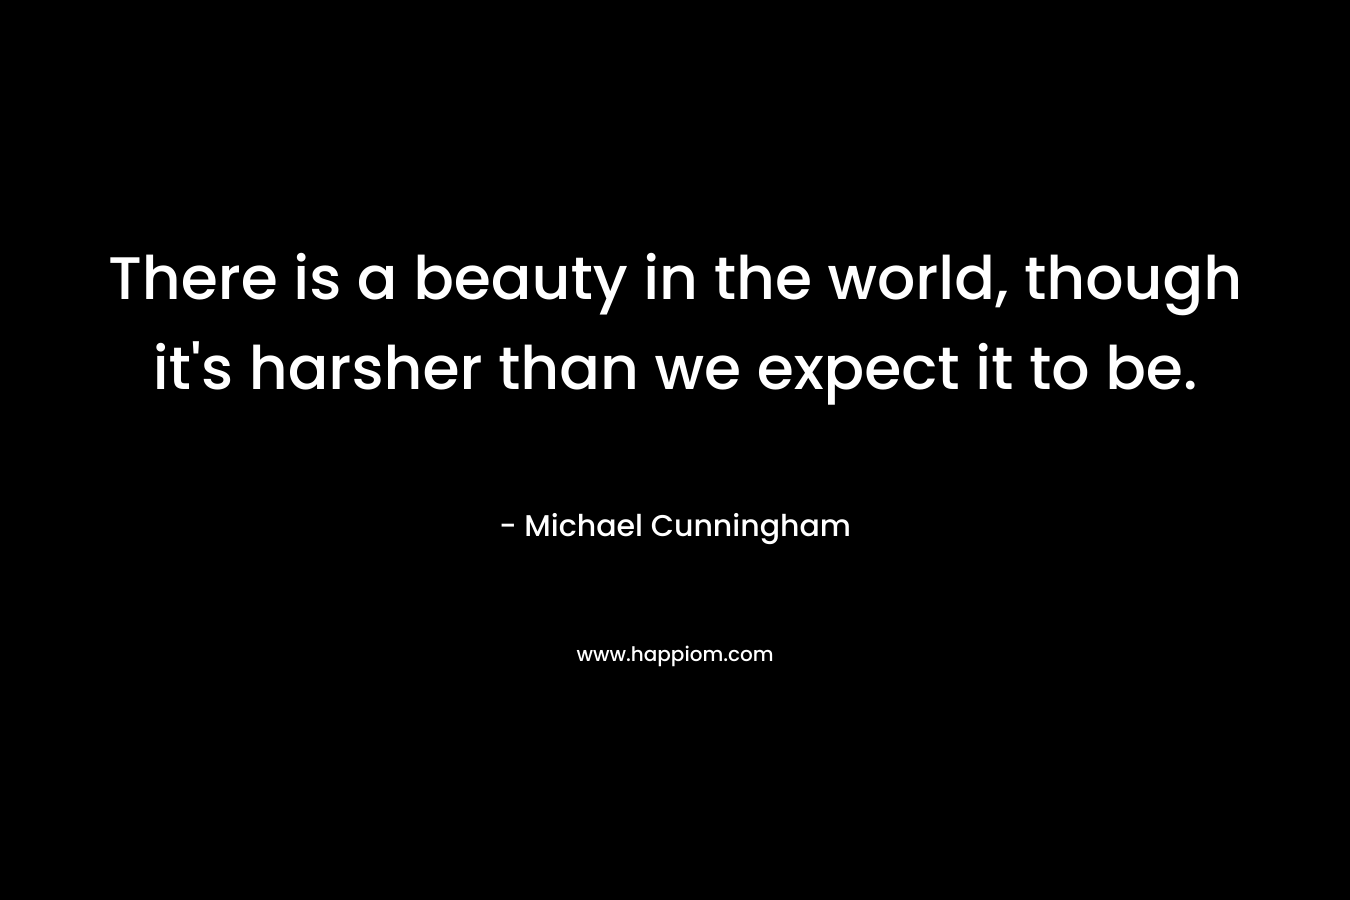 There is a beauty in the world, though it's harsher than we expect it to be.